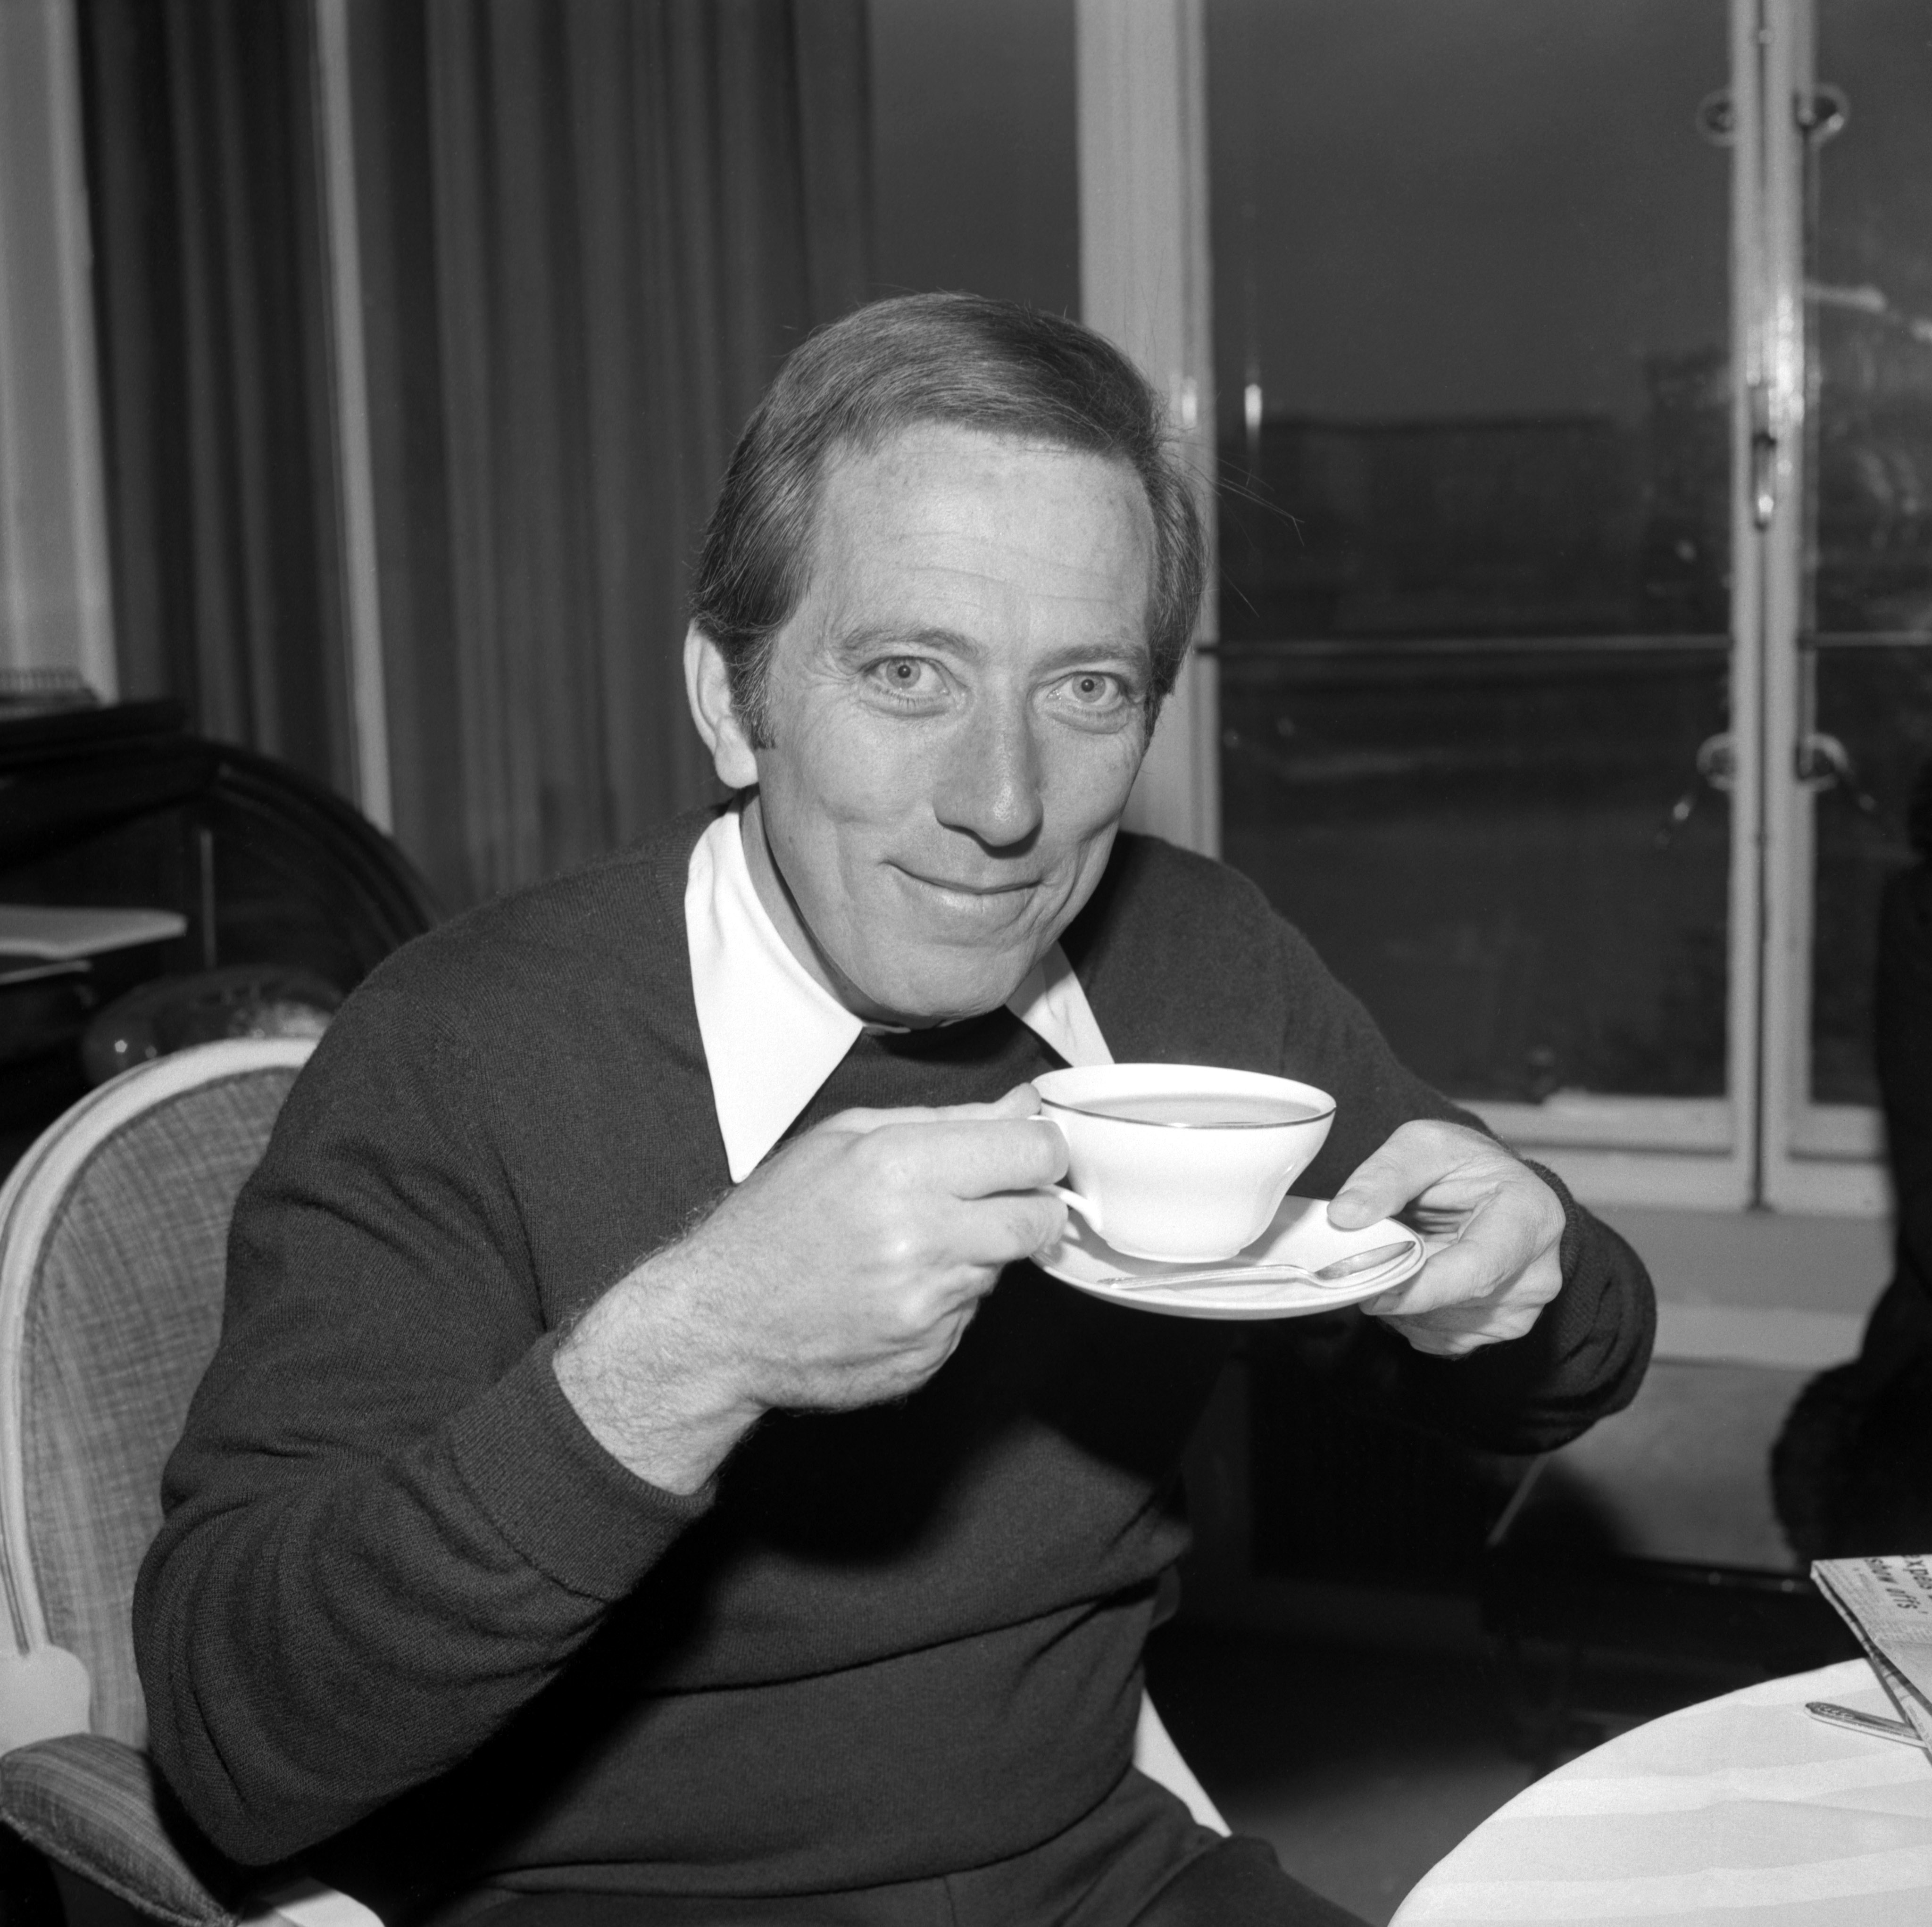 "I Want to Be Free" singer Andy Williams holding a cup of tea